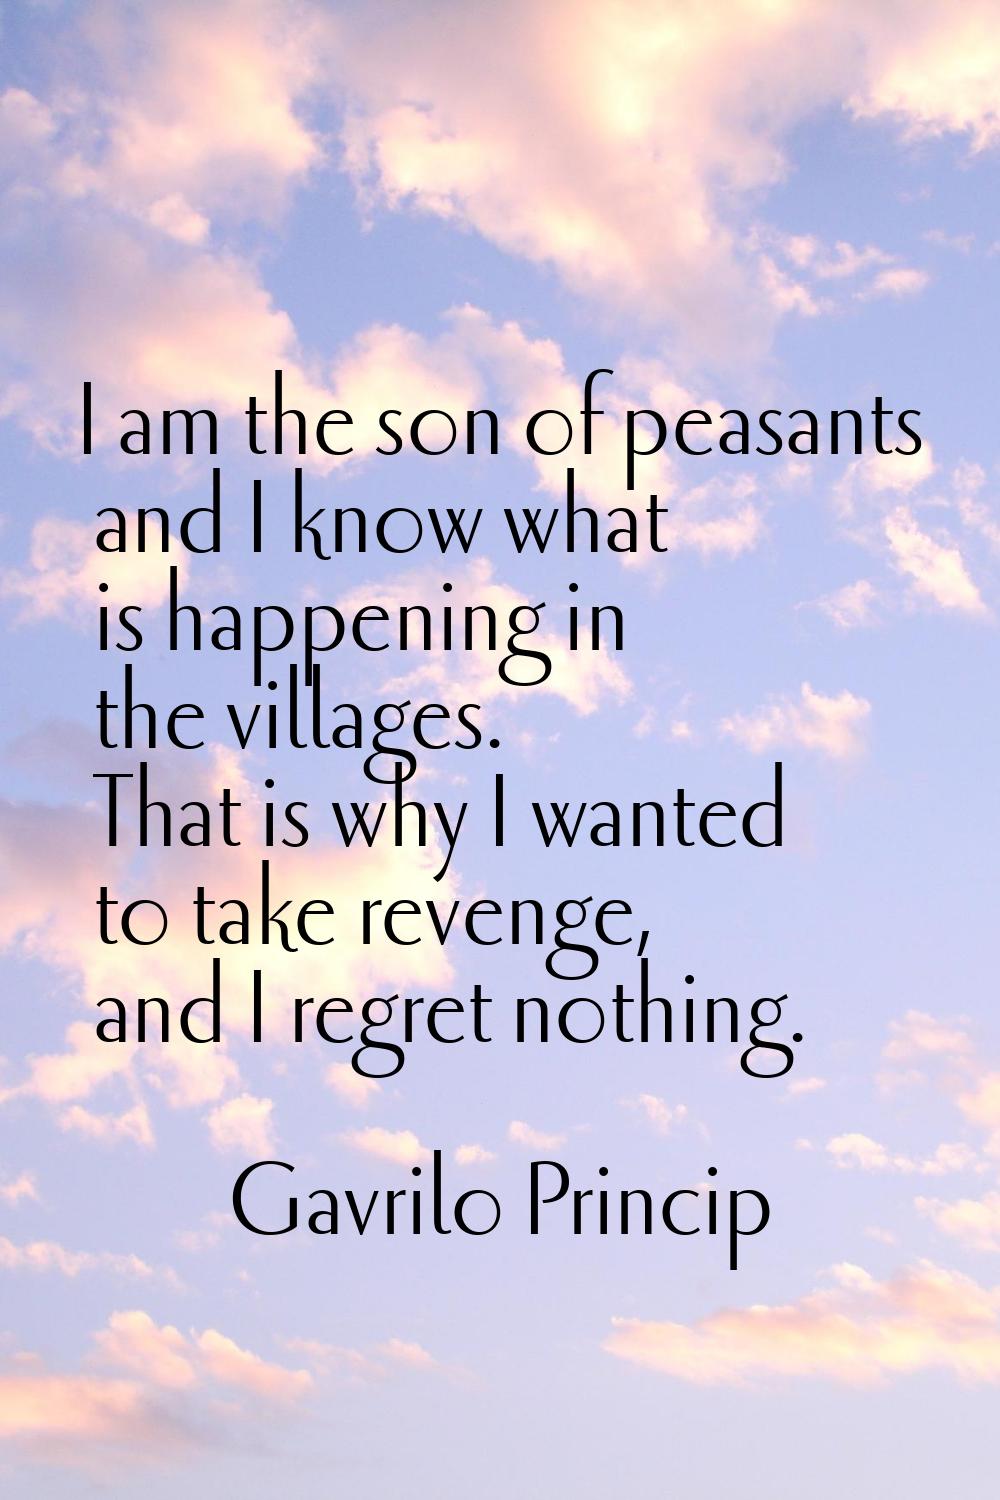 I am the son of peasants and I know what is happening in the villages. That is why I wanted to take